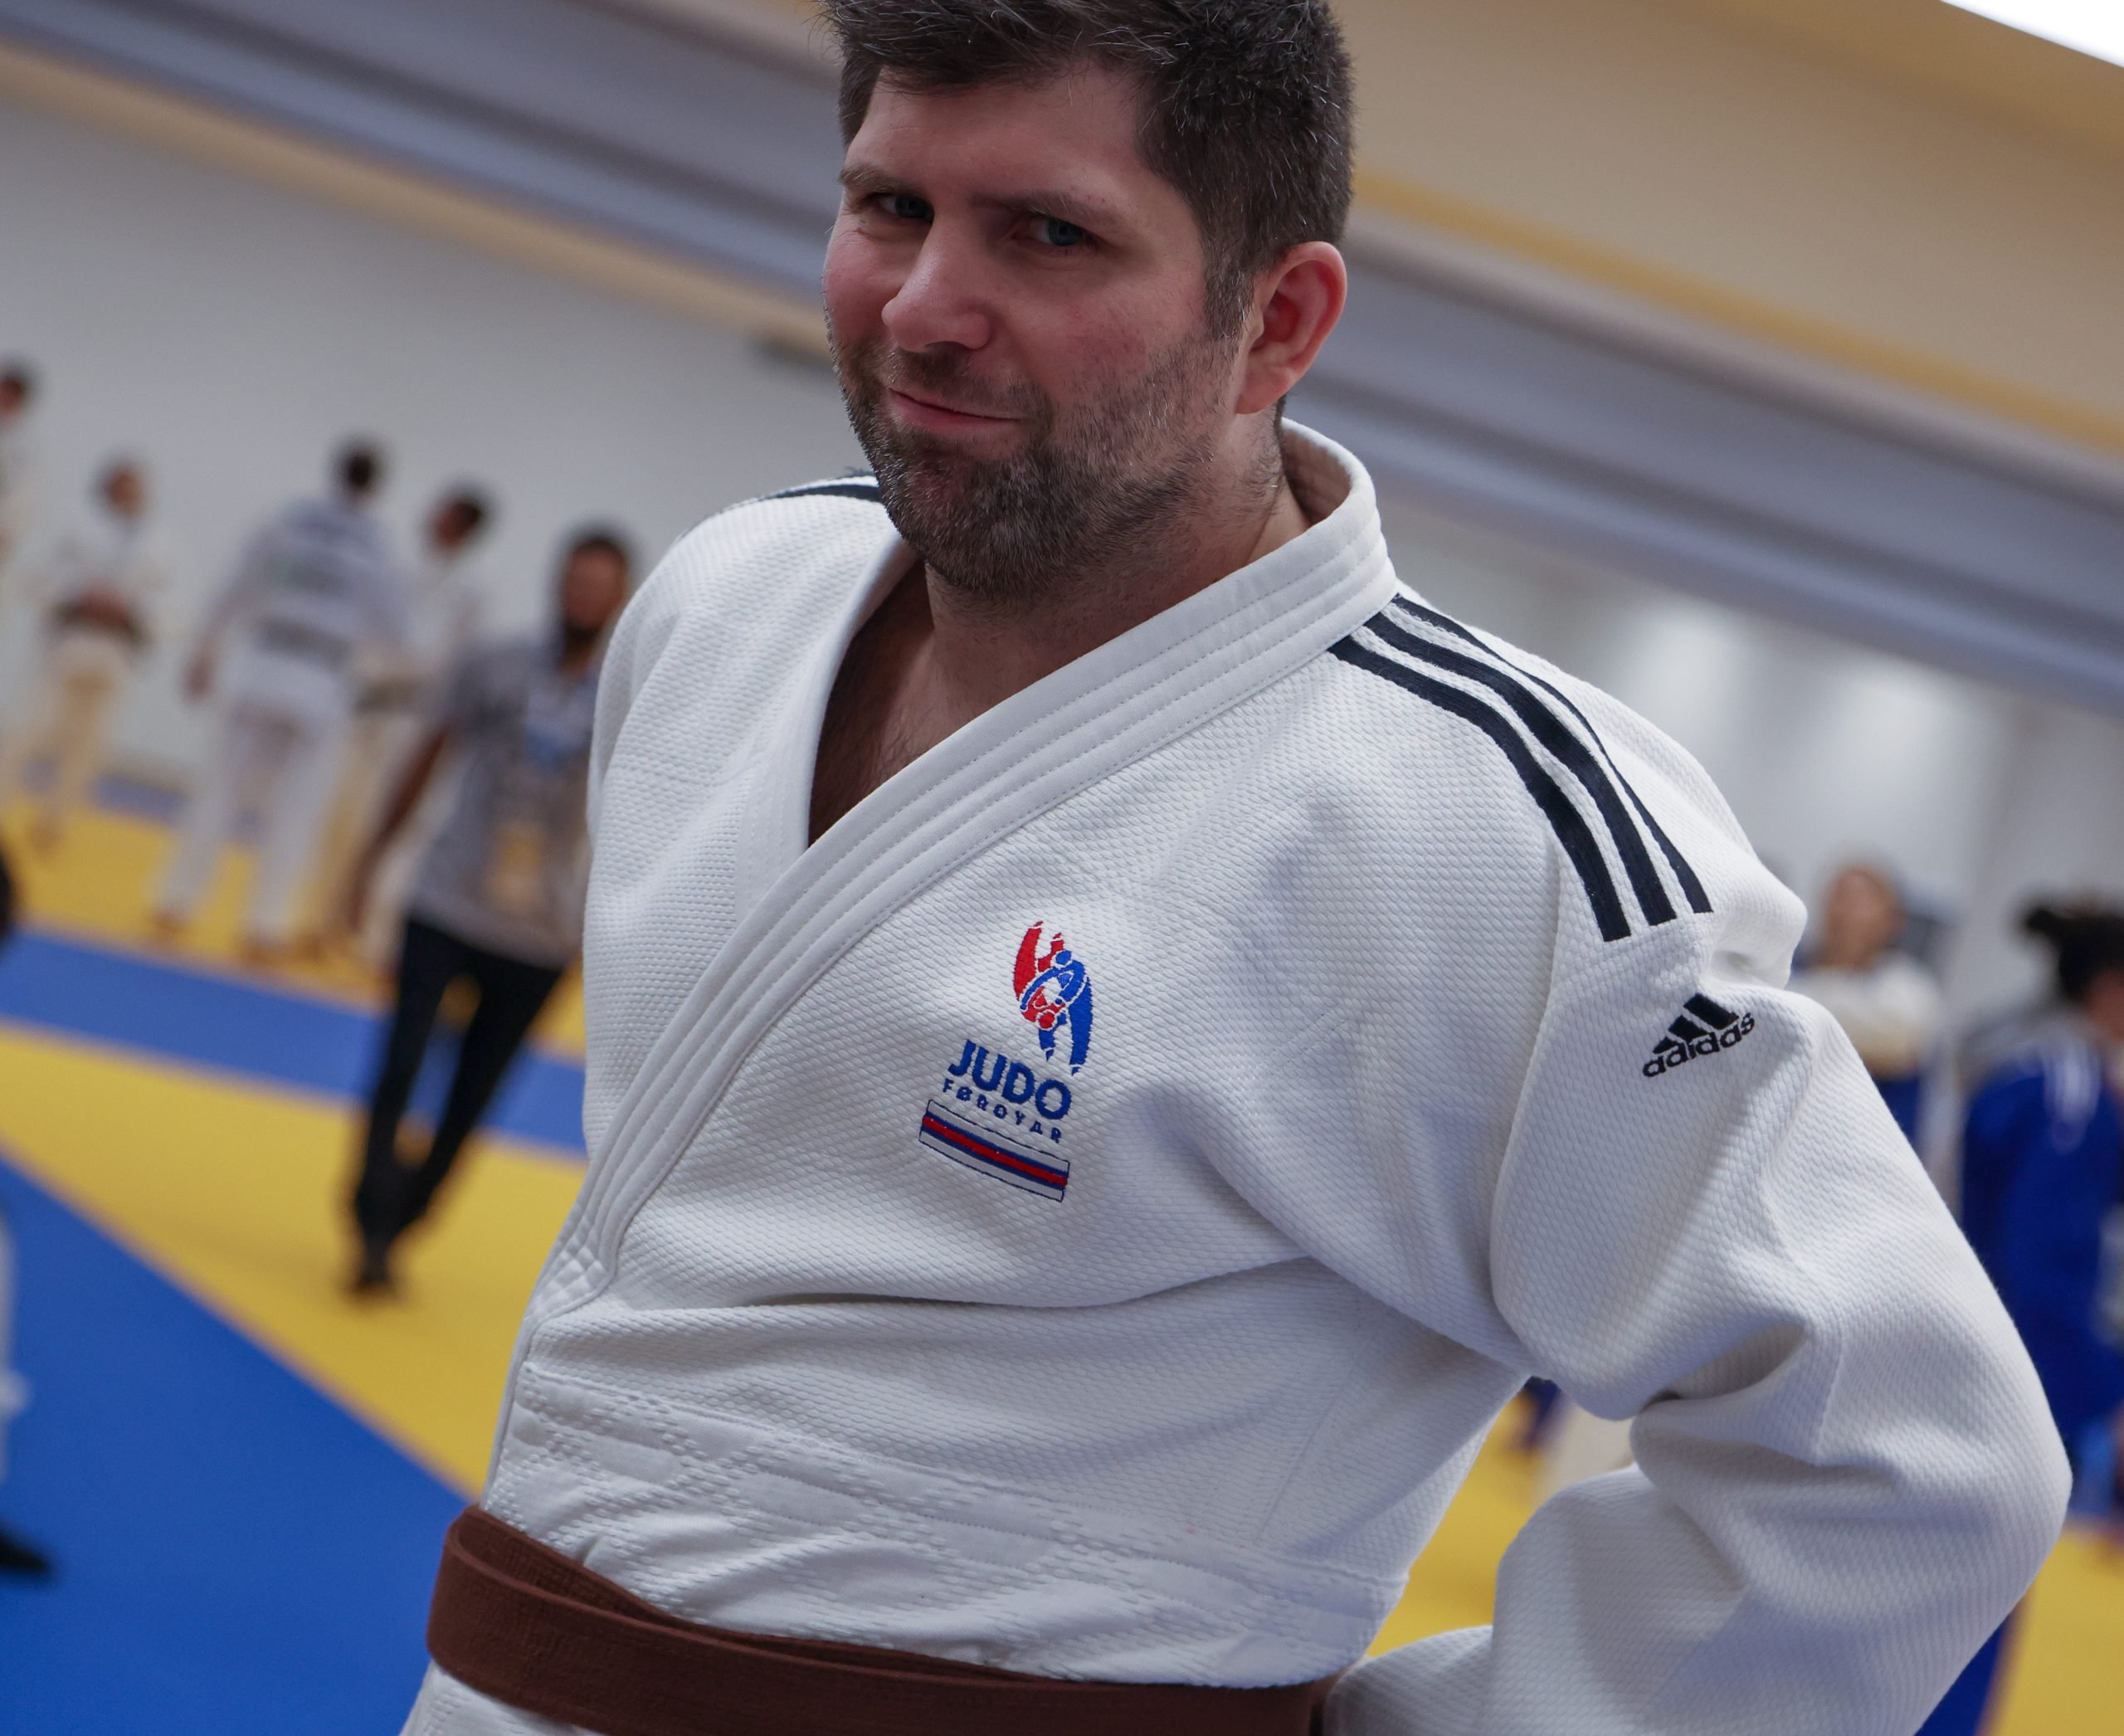 JUDO BEYOND THE OLYMPIC GAMES